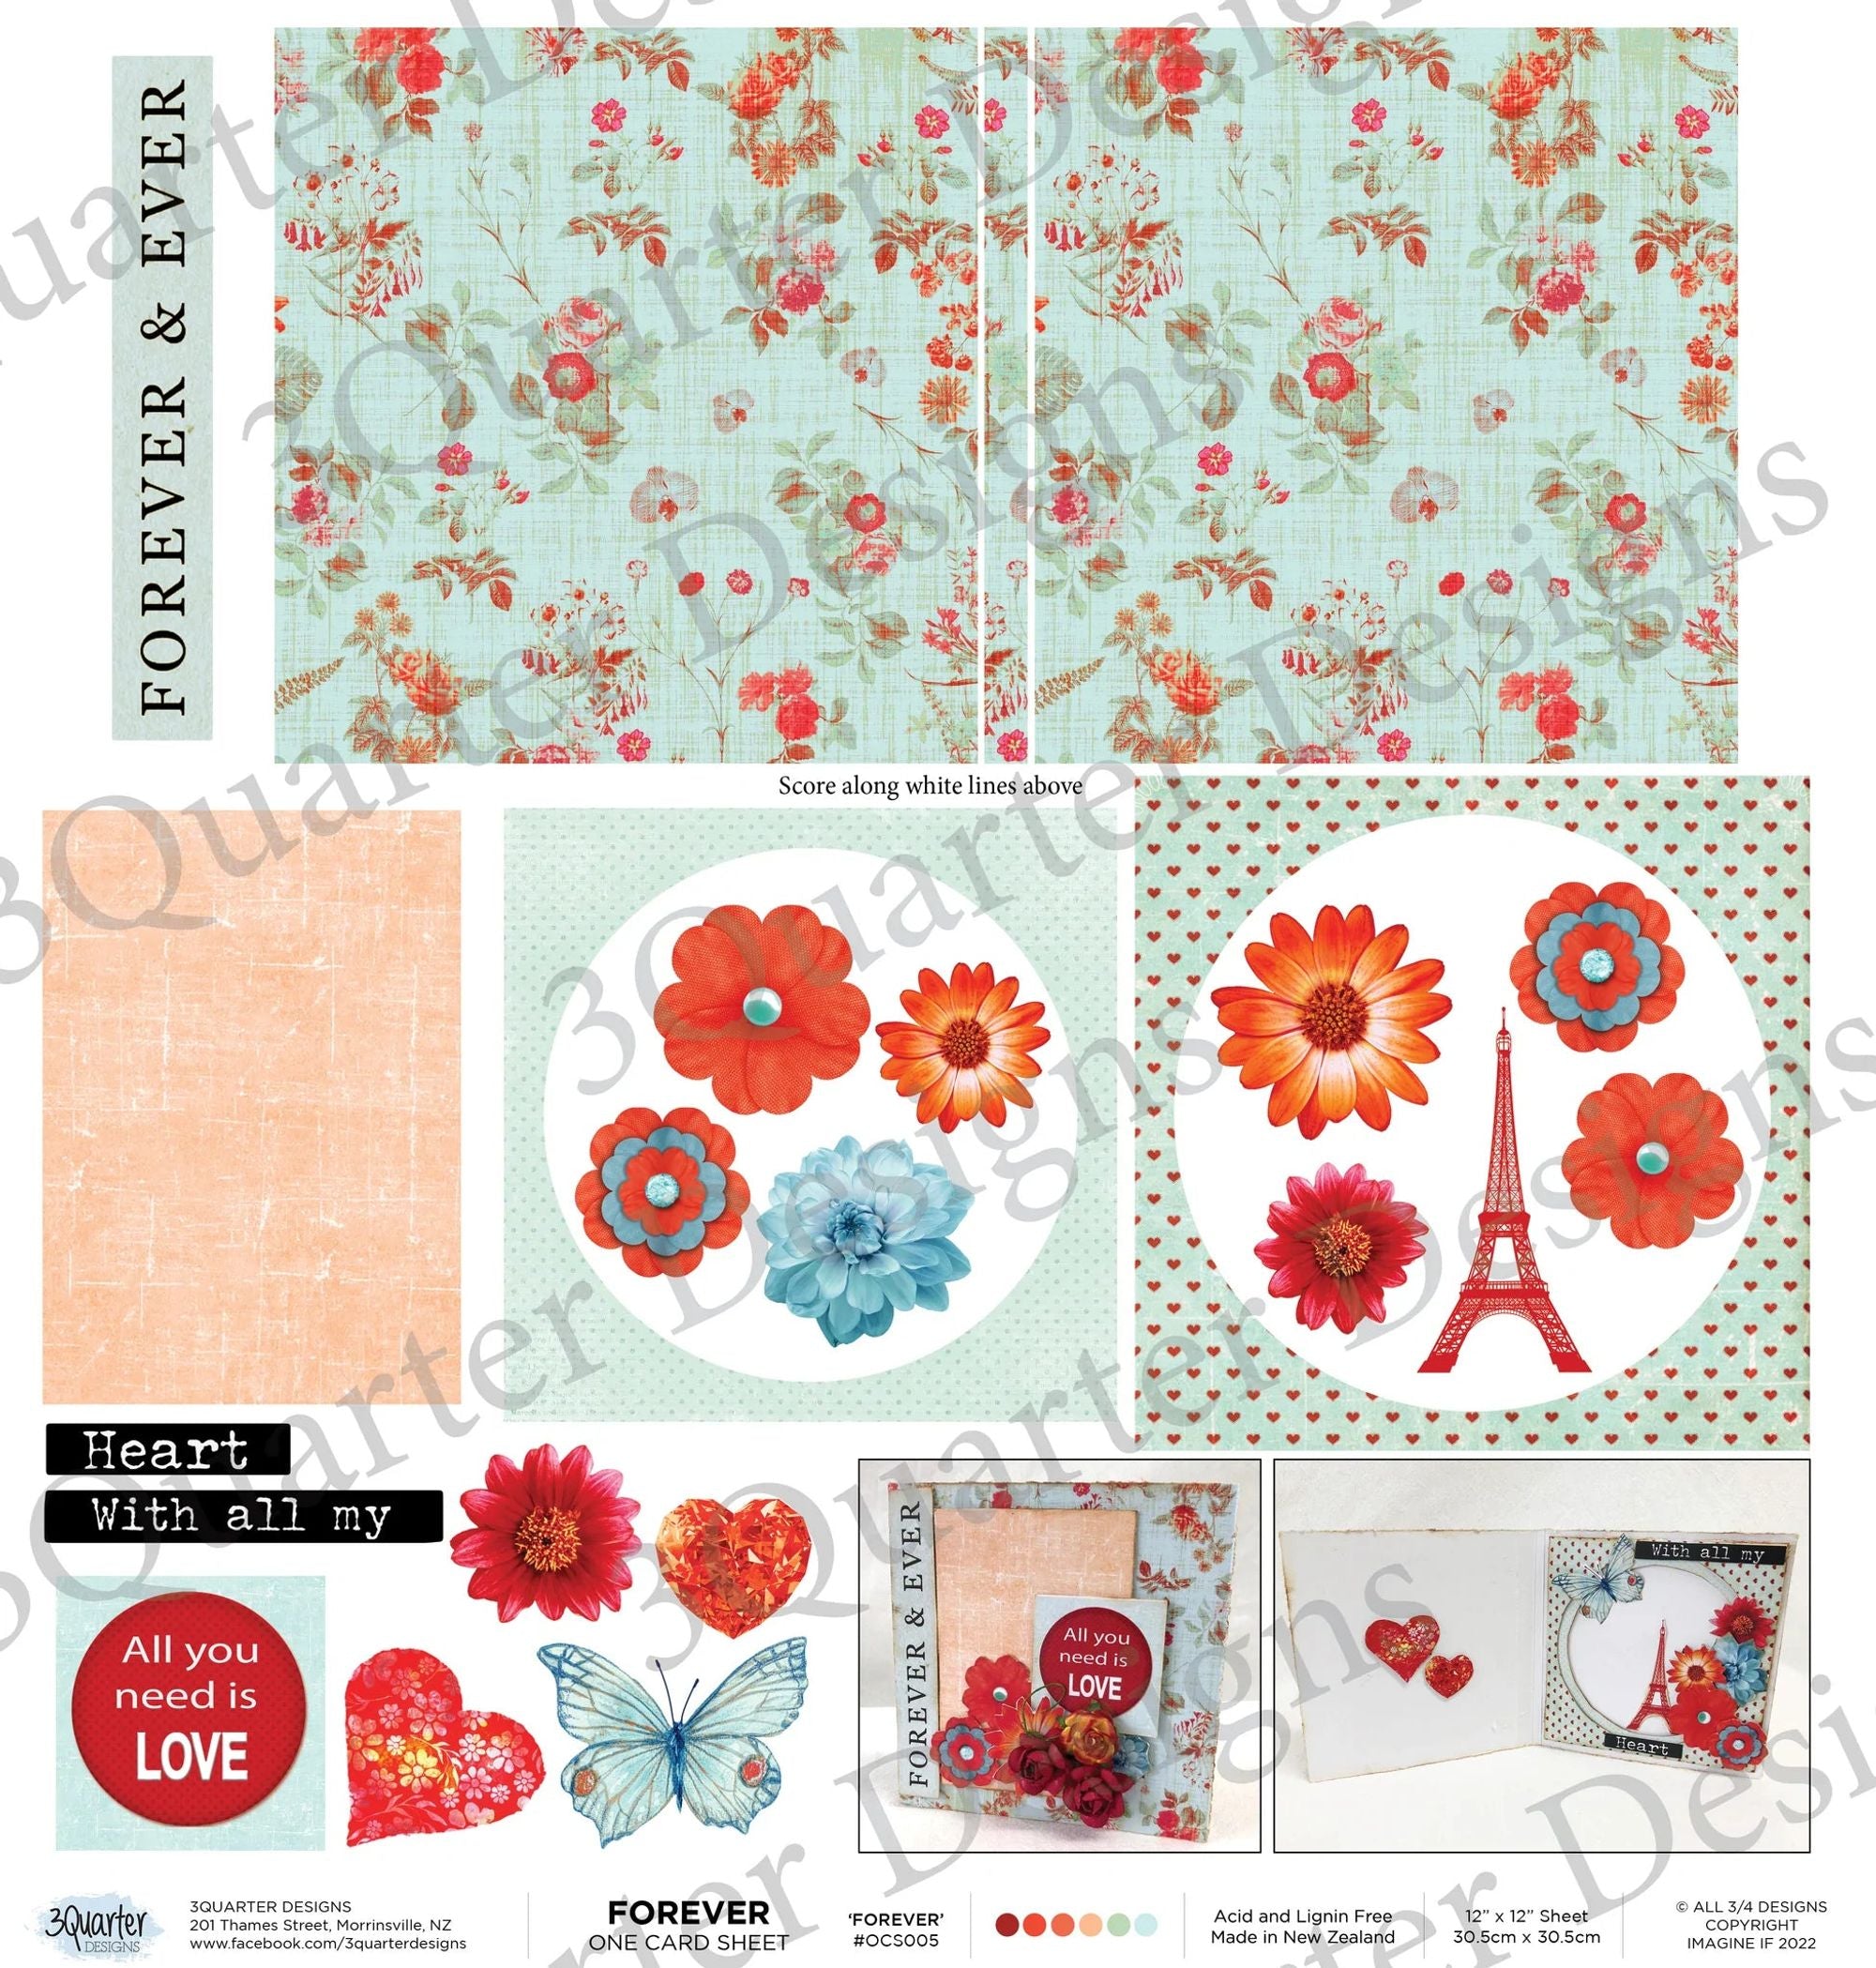 3Quarter Designs - One Card Project Sheet - Forever